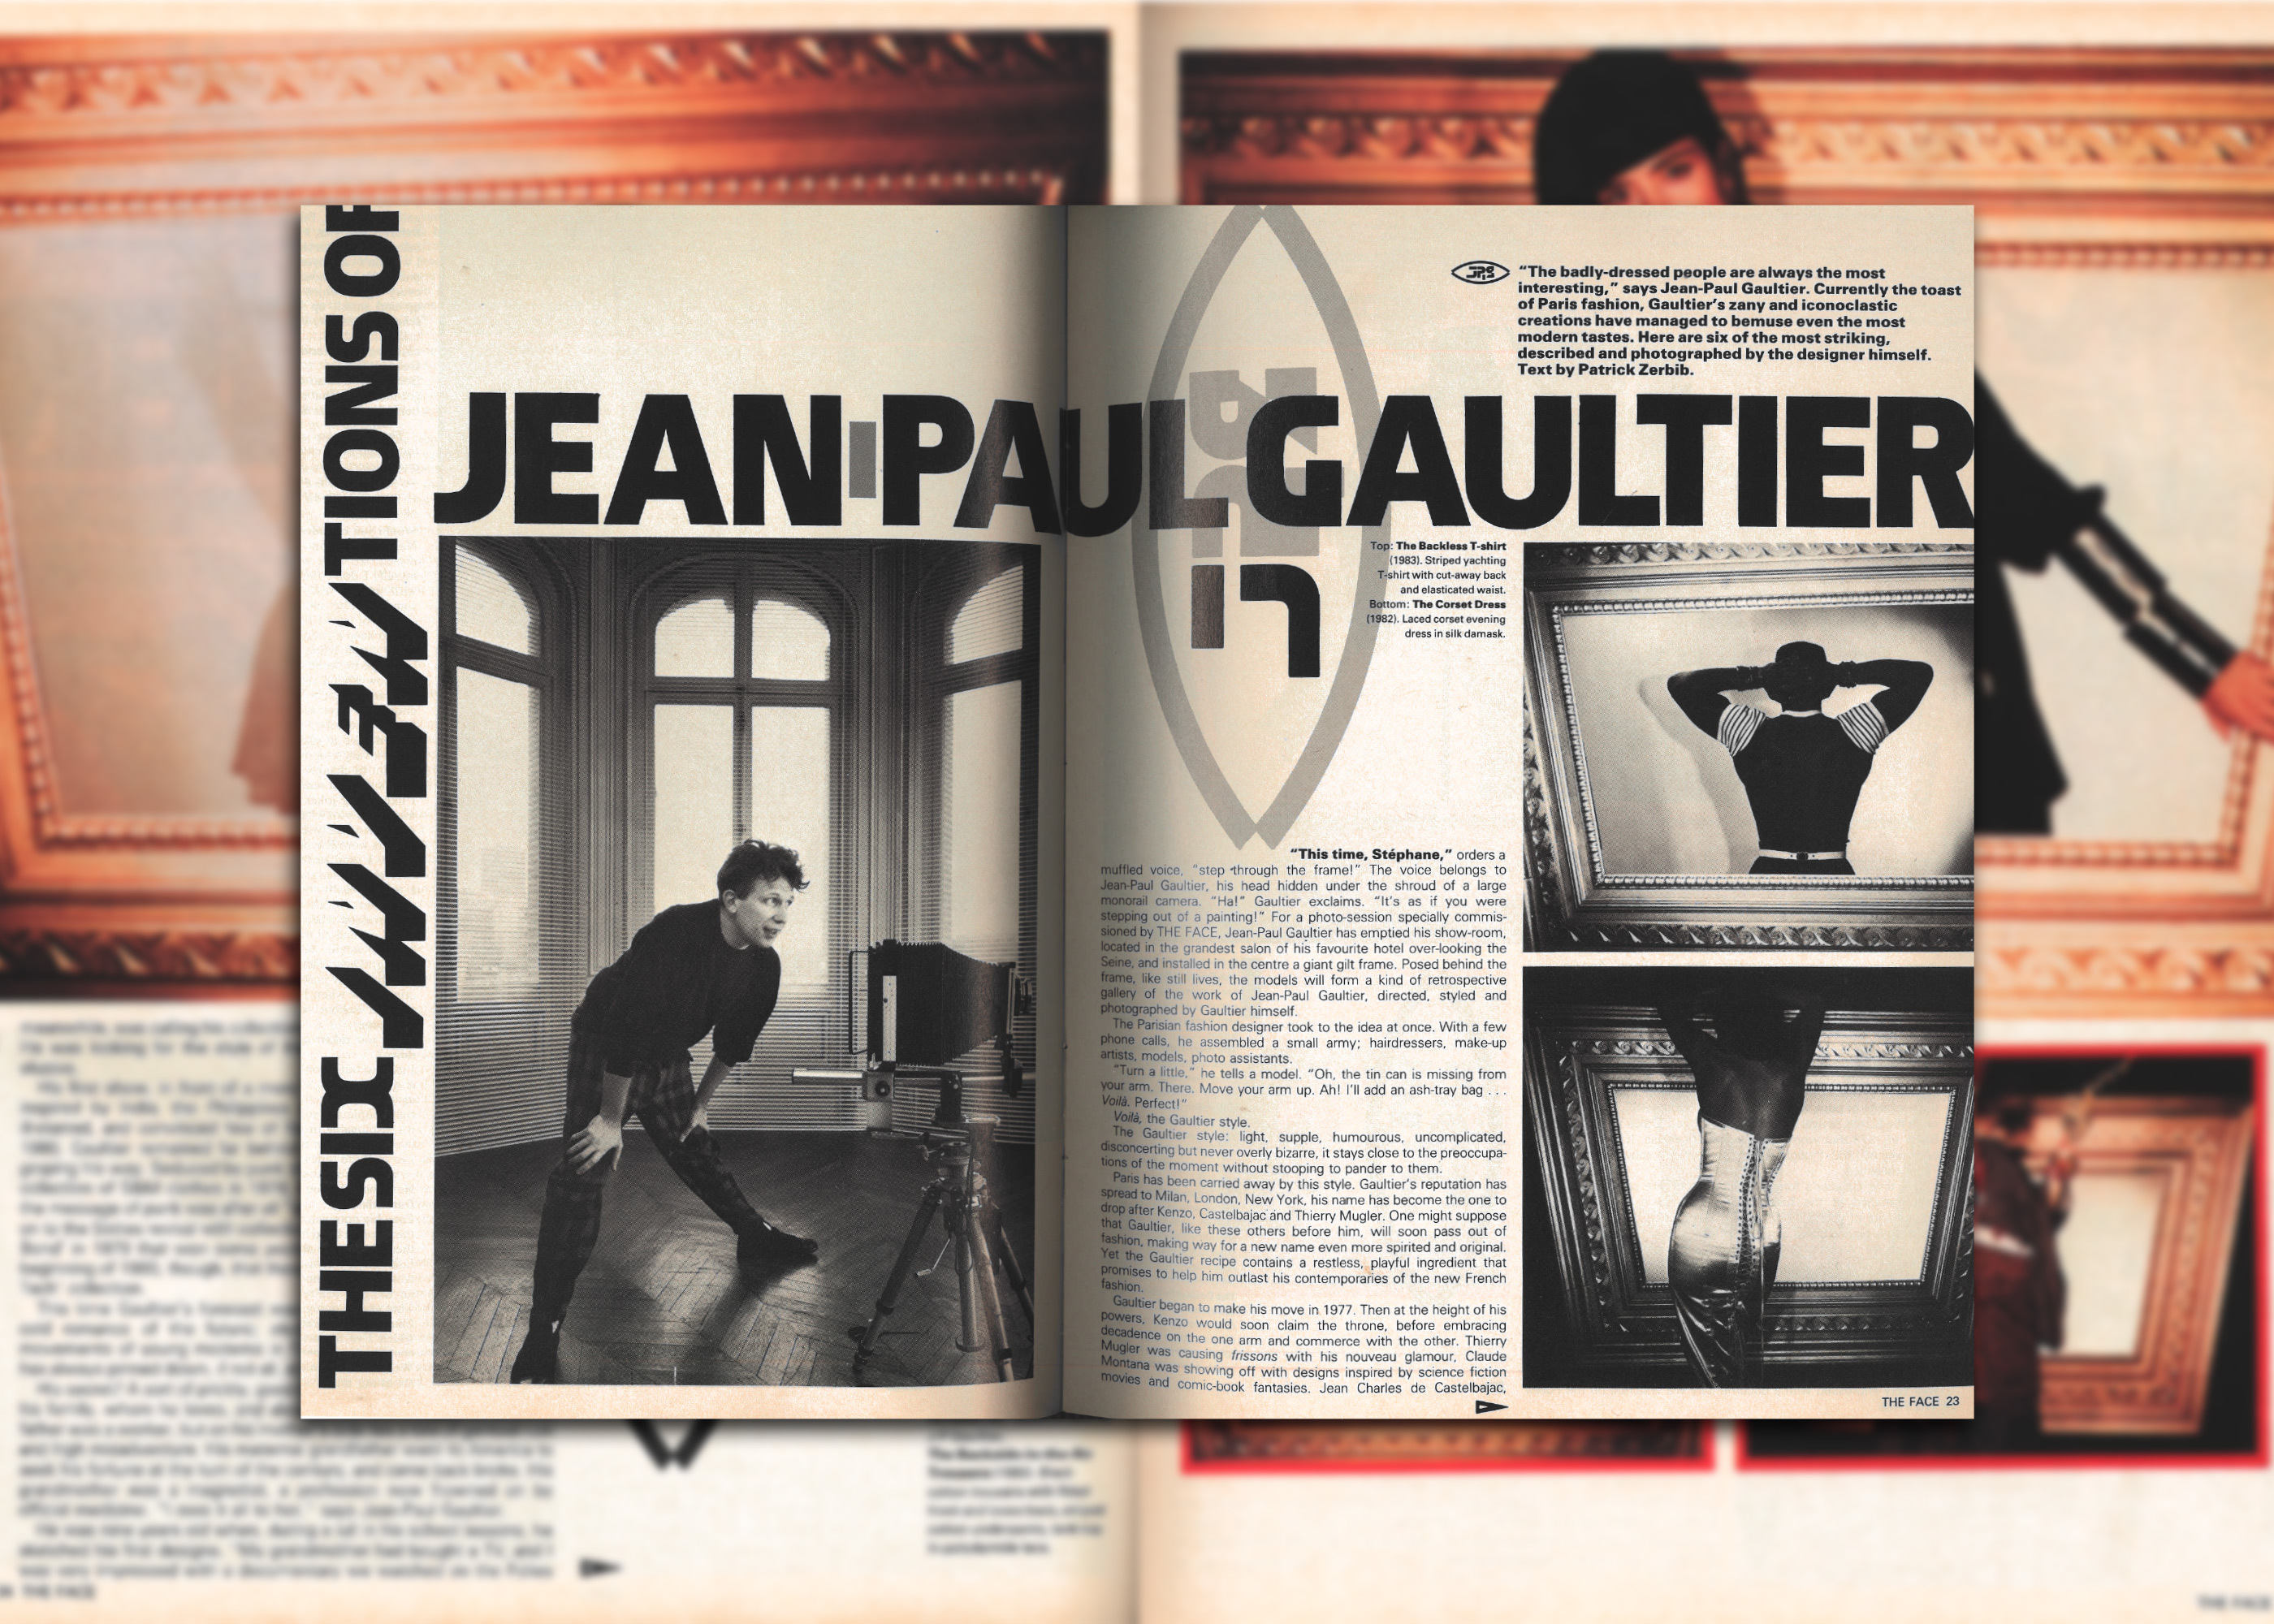 The inventions of Jean-Paul Gaultier - The Face